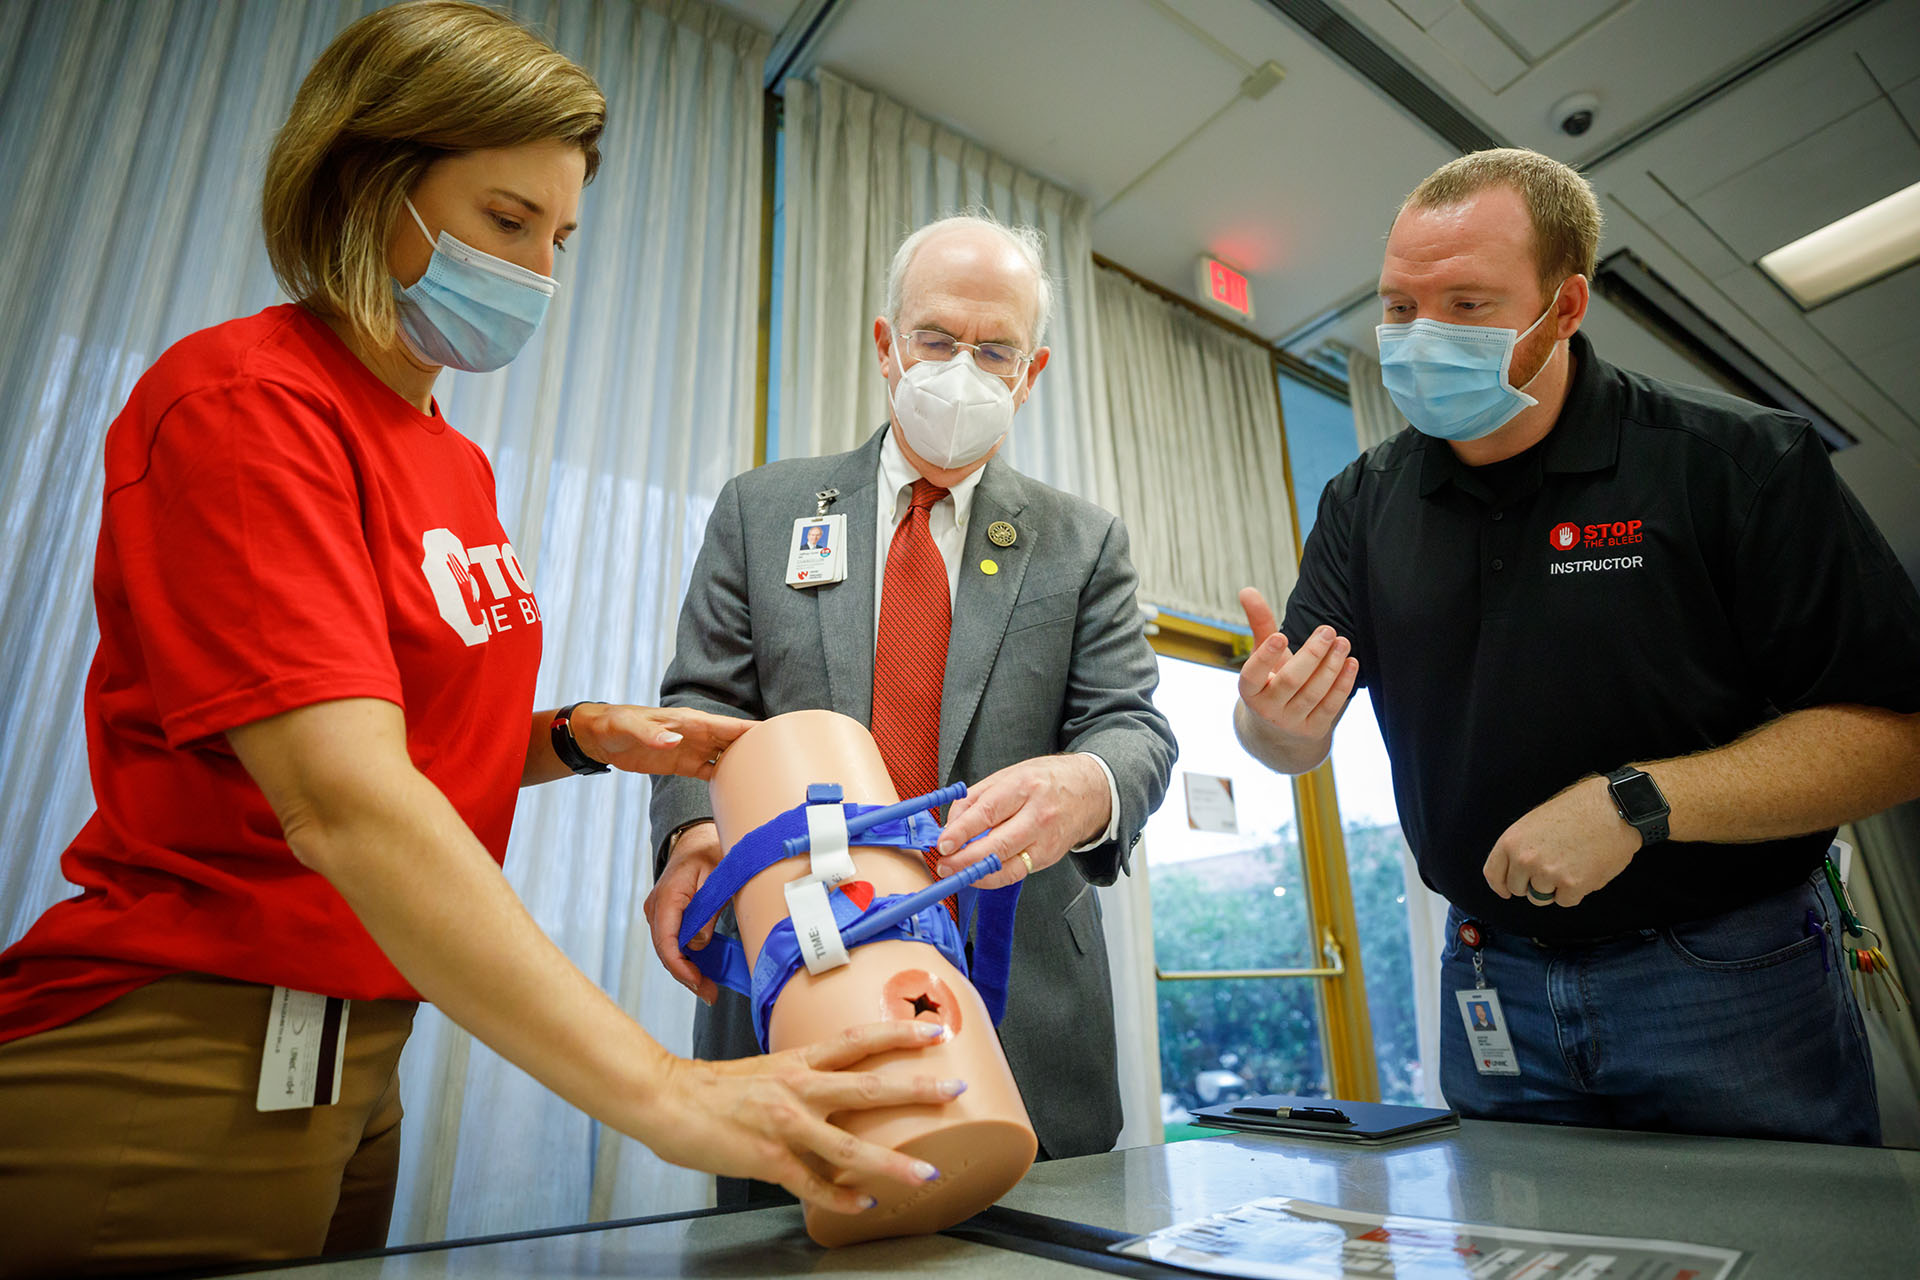 Sara Bills&comma; DPT&comma; an assistant professor and associate director of the UNMC Division of Physical Therapy Education&comma; trains with a tourniquet with UNMC Chancellor Jeffrey P&period; Gold&comma; MD&comma; and Austin Brake&comma; program coordinator for the UNMC HEROES Program&comma; during Monday’s Stop the Bleed training&period;